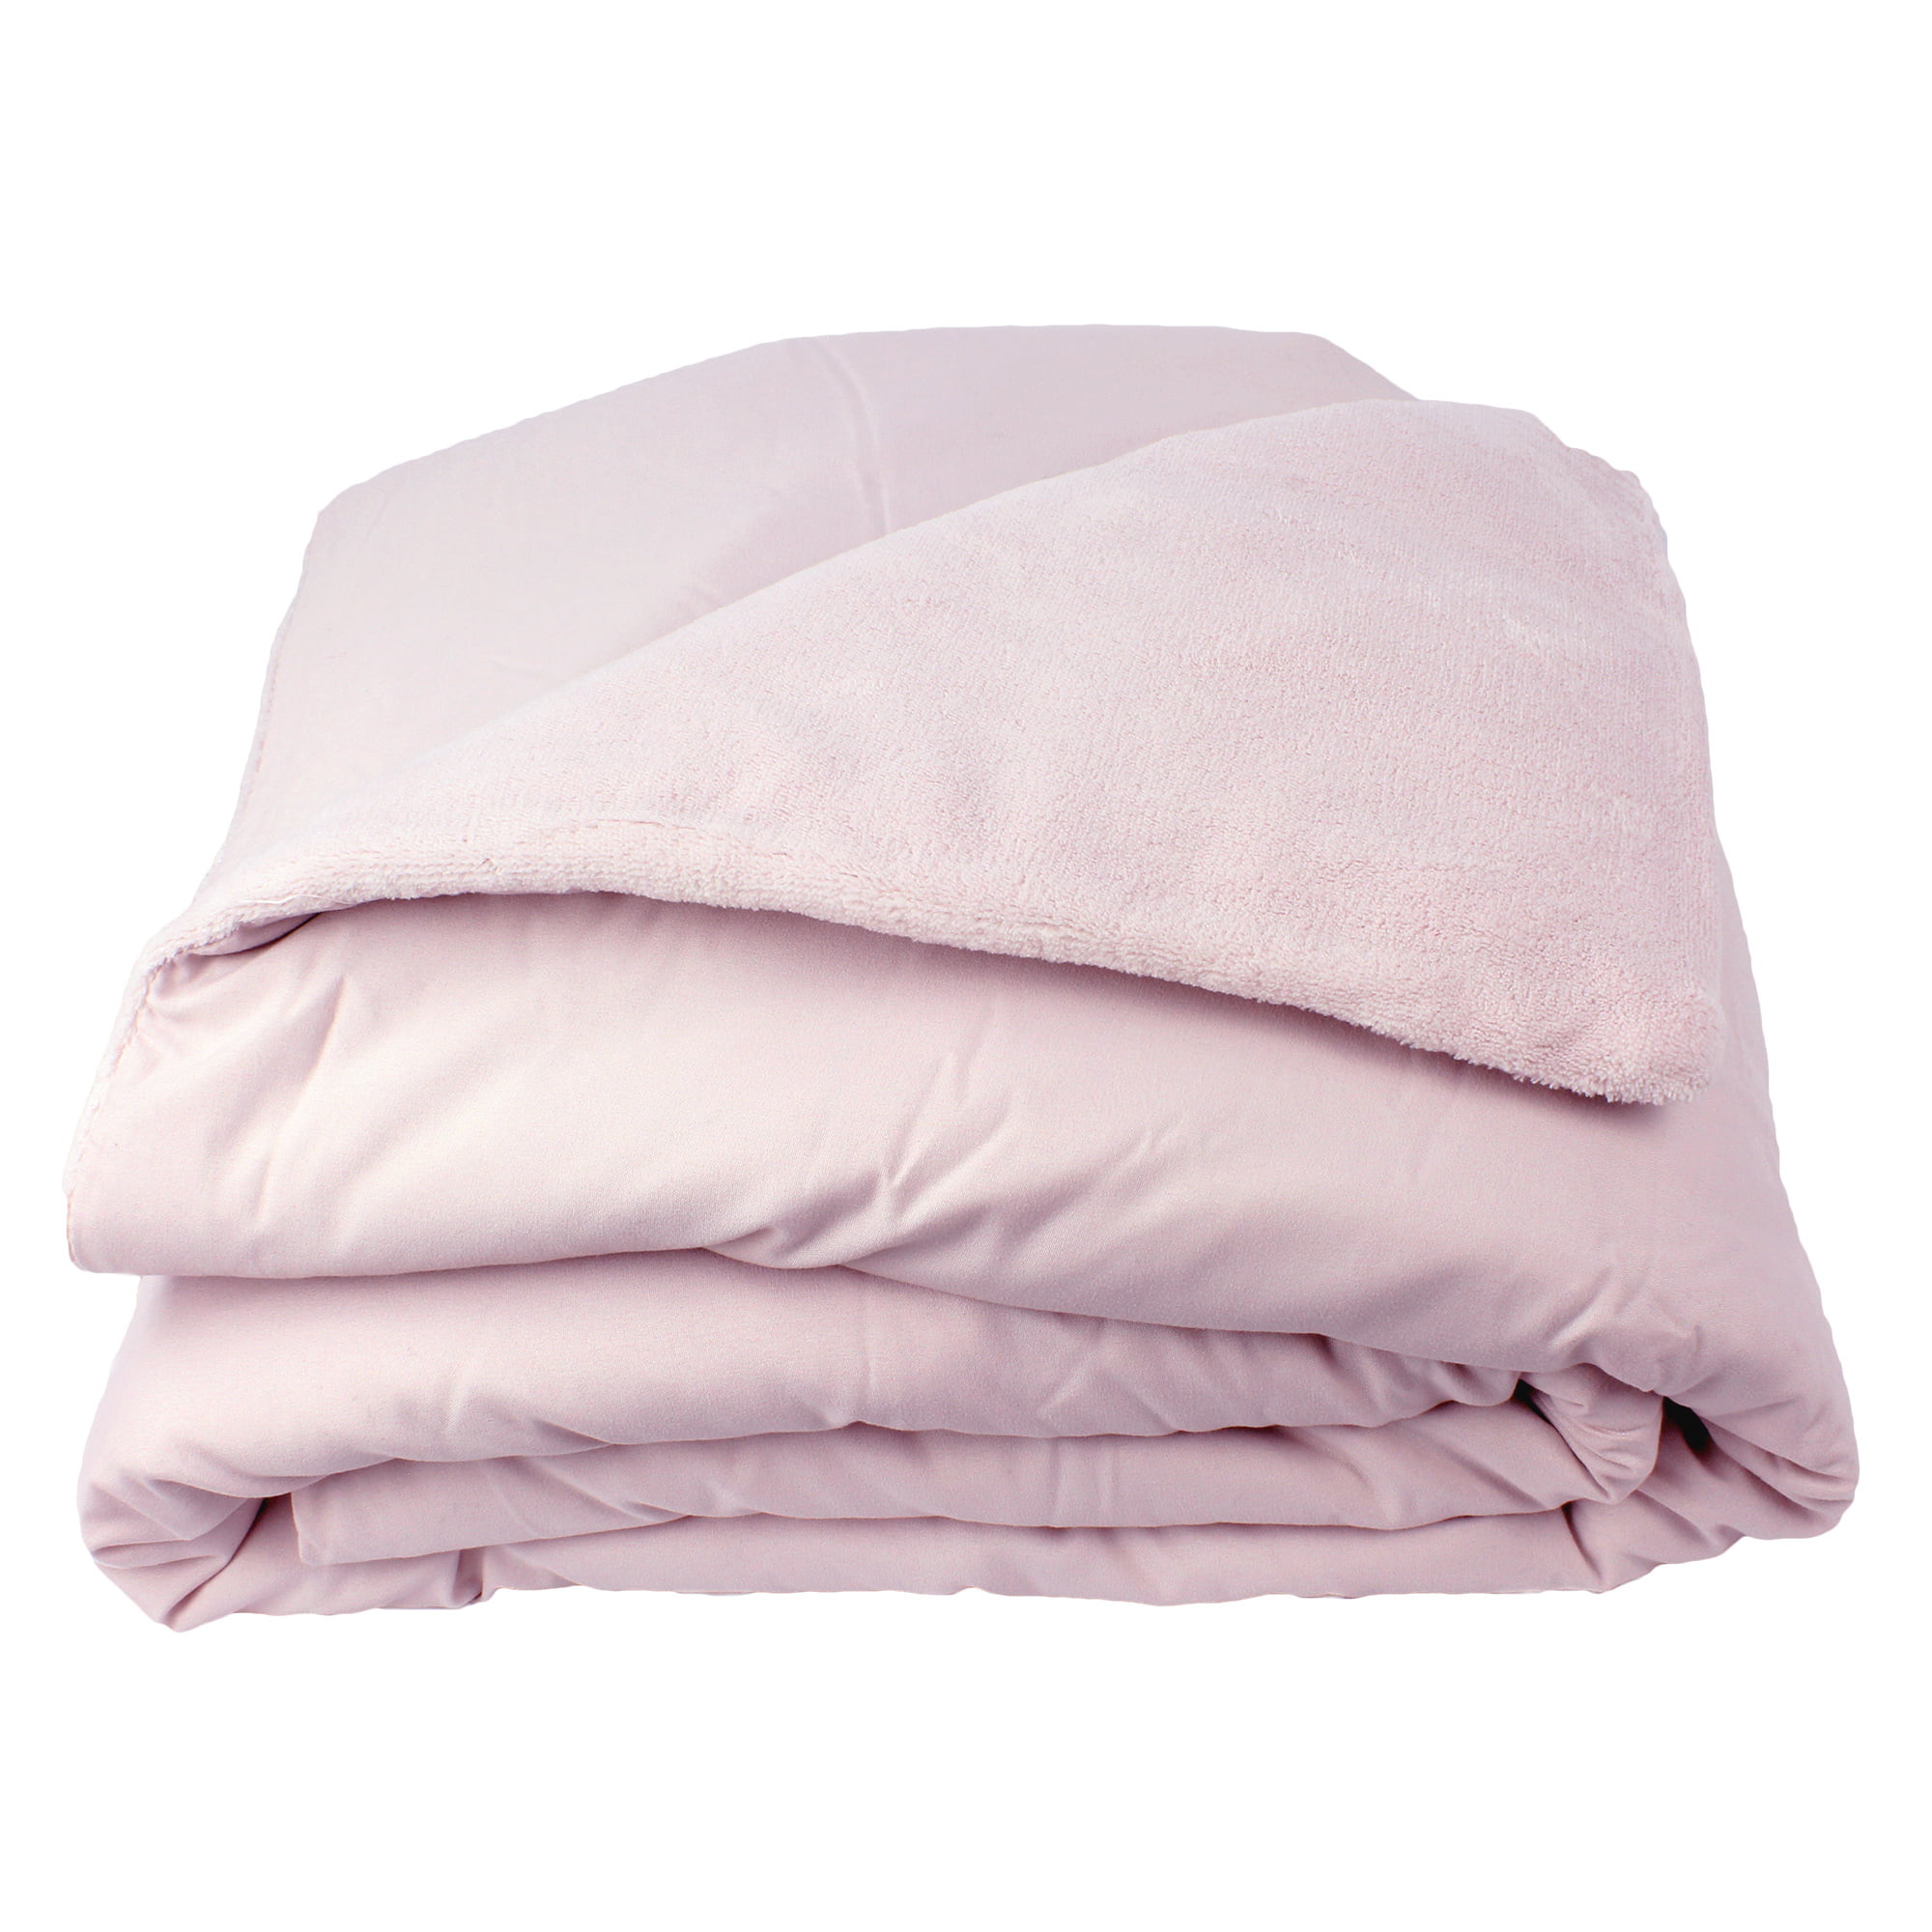 Sleep Therapy 2Pc Weighted Blanket and Cover, 15lbs, 48 x 72, Blush ...